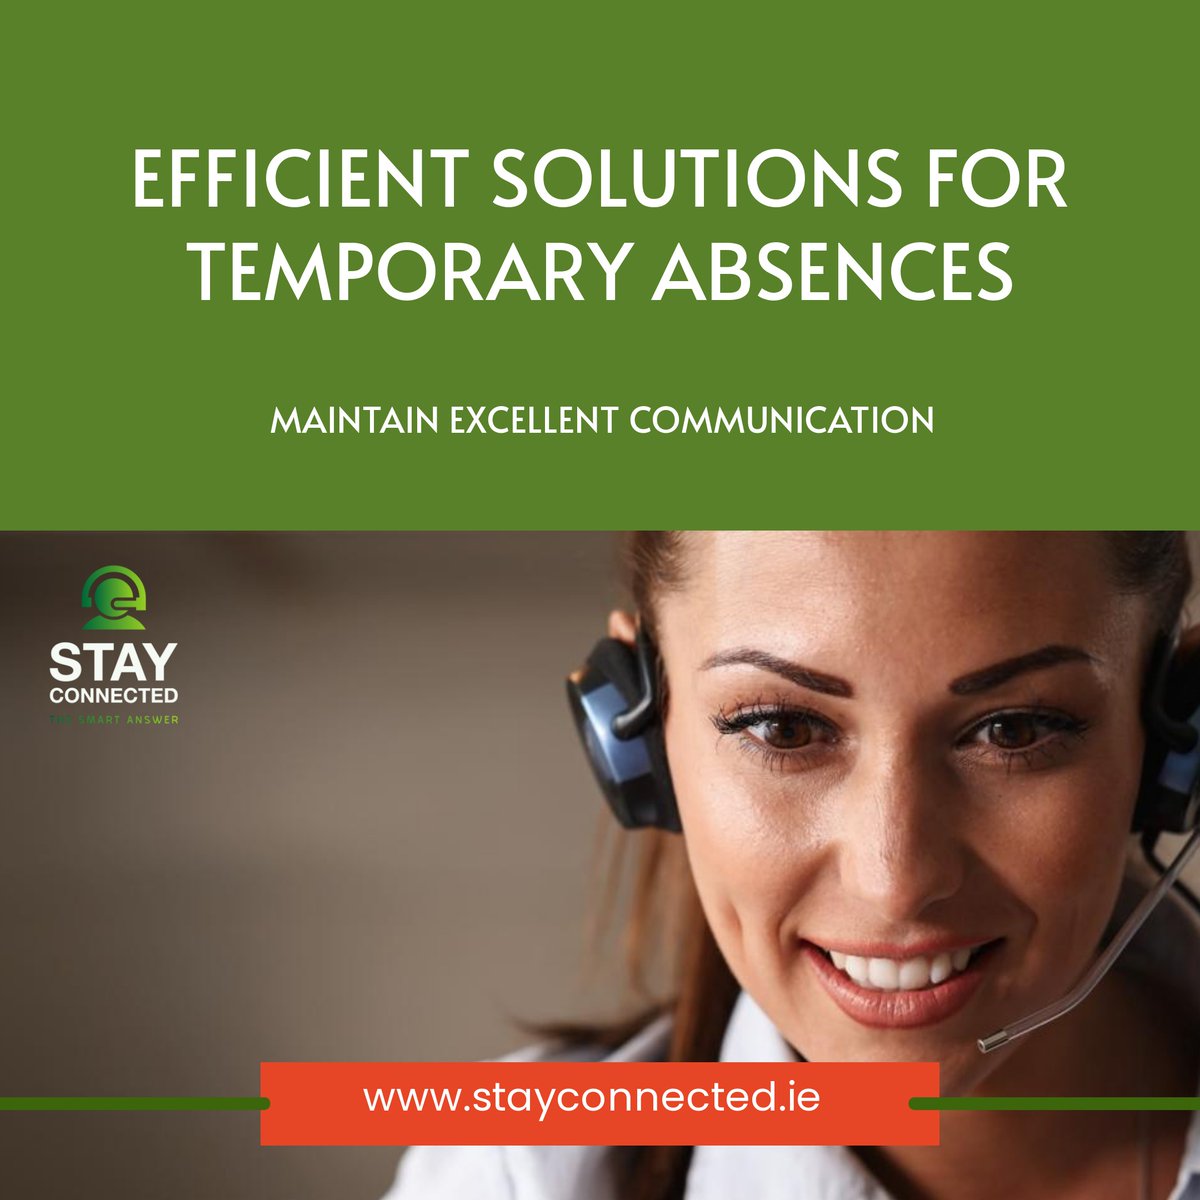 Don't let missed calls affect your business! With Stay Connected's efficient call answering services, you can ensure that every call is attended to, even during temporary absences or staff holidays. Stay connected with your customers and never miss an opportunity #CallAnswering